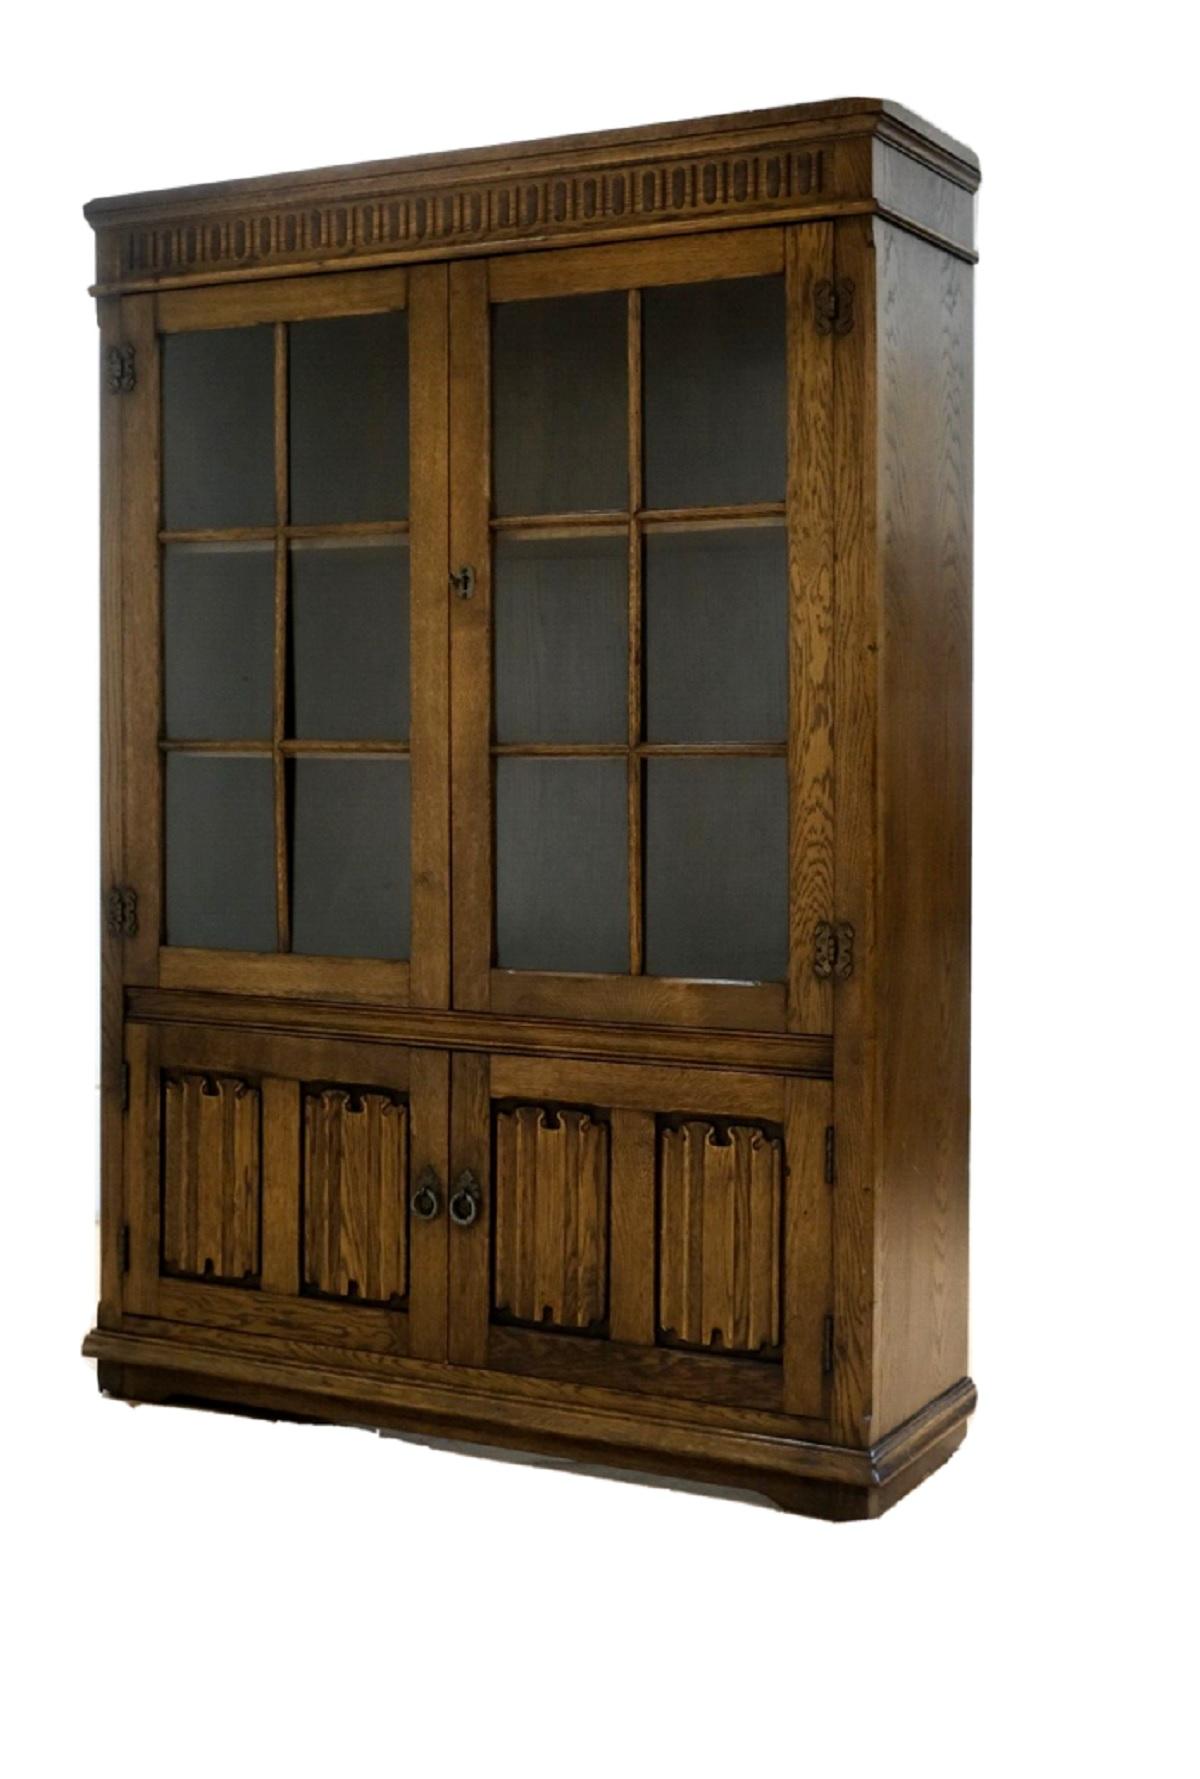 We are delighted to offer for sale this charming brown Oak 20th Century display cabinet with key and shelves. 

This well made, good looking and practical piece is ideal for your kitchen or dining room as it doesn't use much space and has plenty of